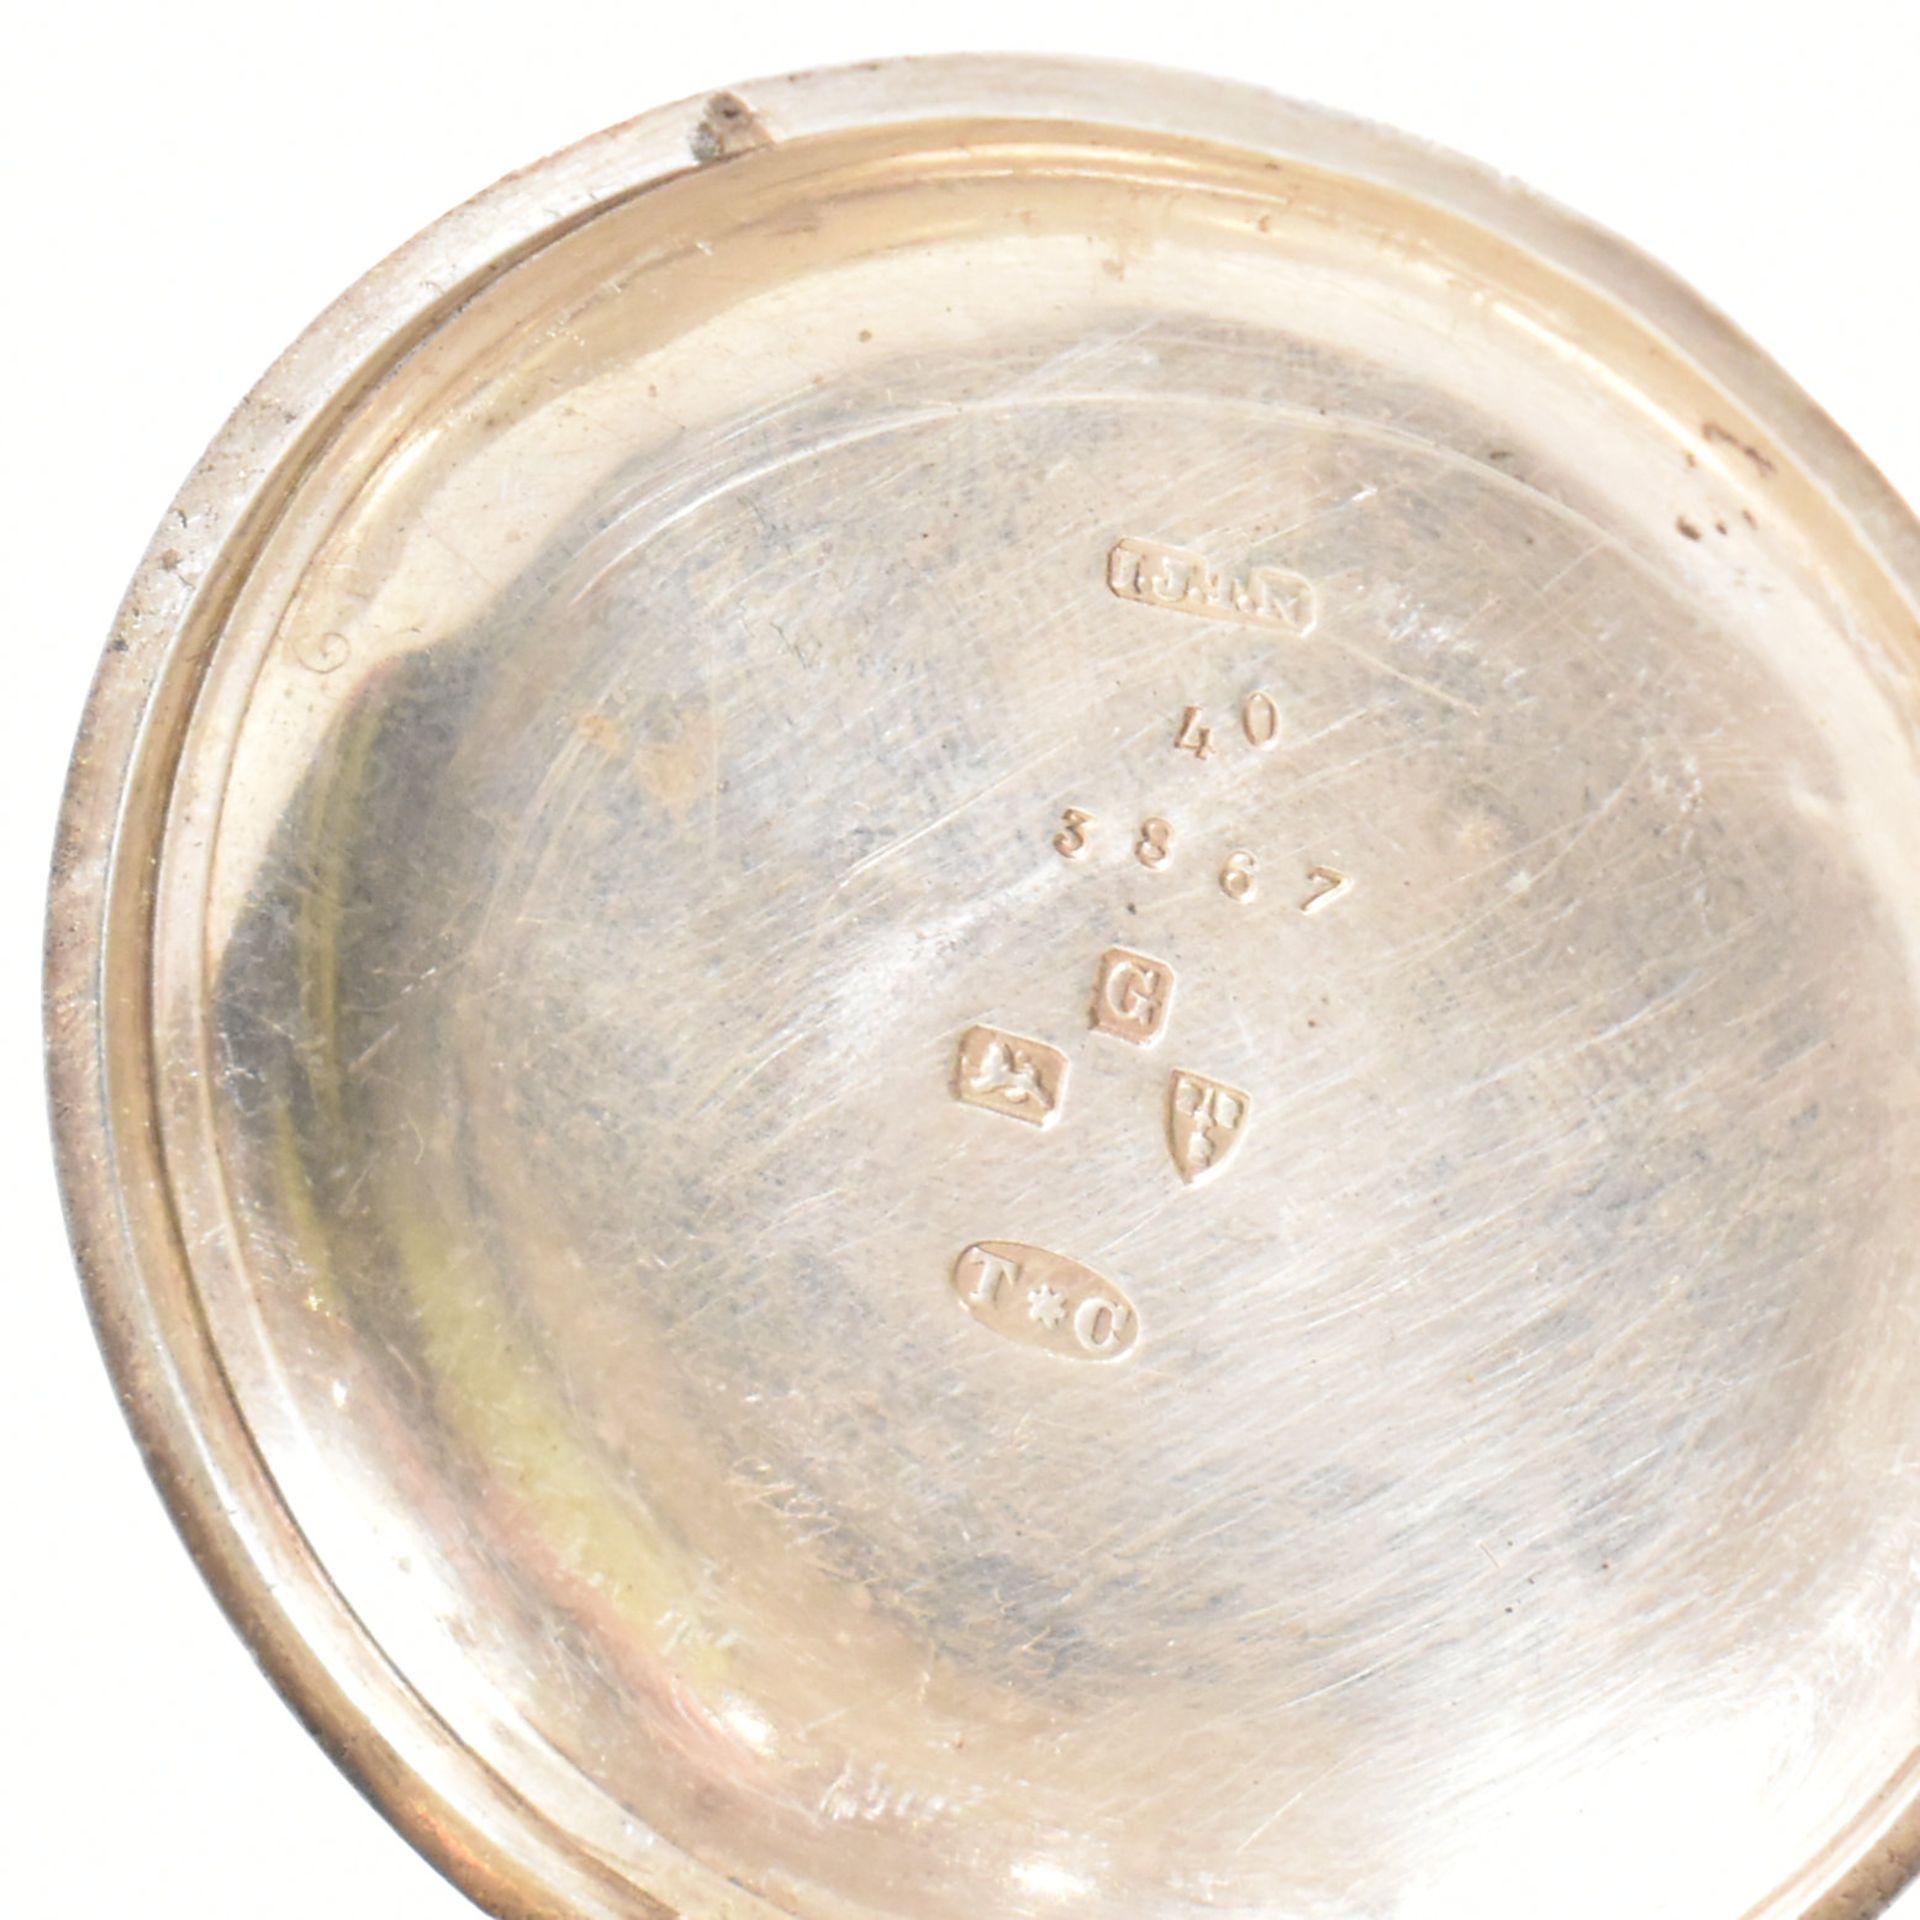 SILVER HALLMARKED CHESTER OPEN FACED POCKET WATCH & OTHERS - Image 4 of 5